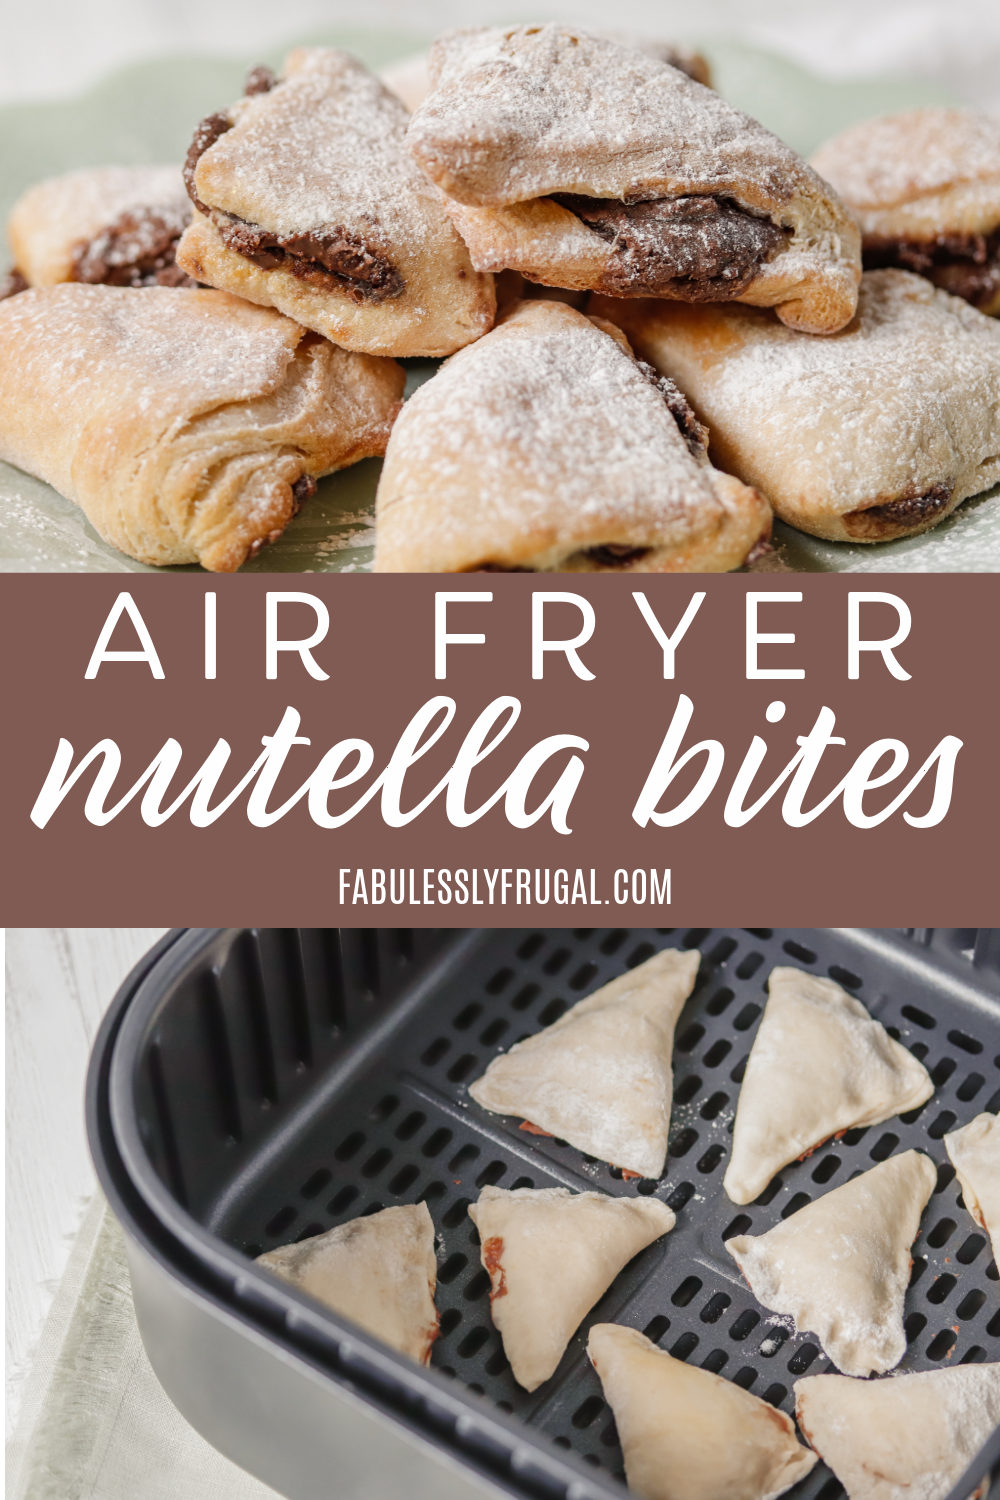 You will love making these Nutella bites in your air fryer because they are ready in 10 minutes and are melt in your mouth good!